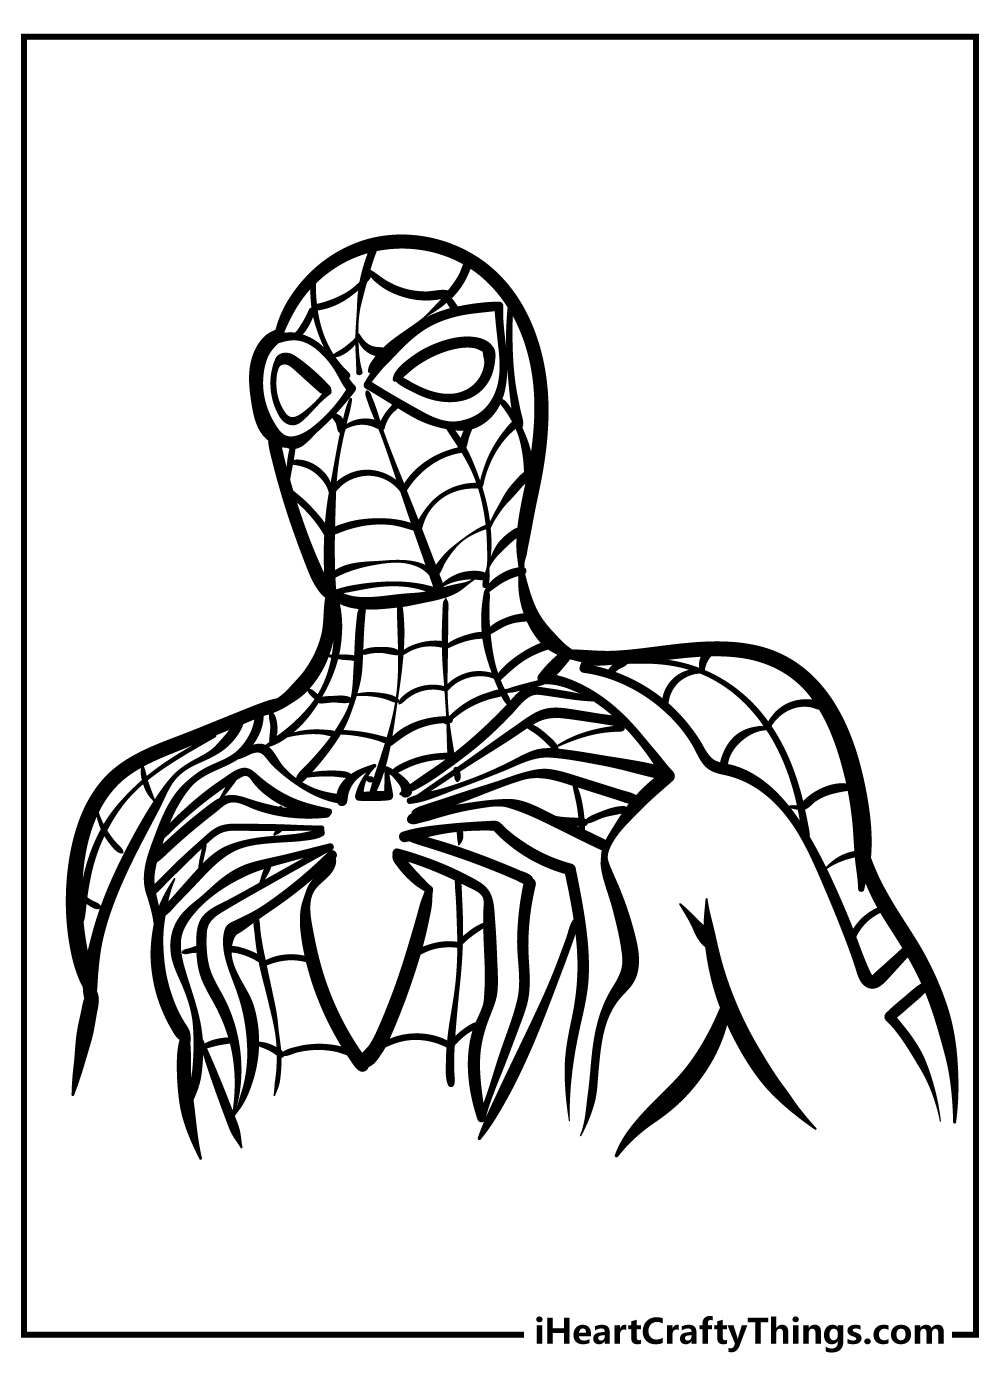 Spiderman Christmas Coloring Pages Download